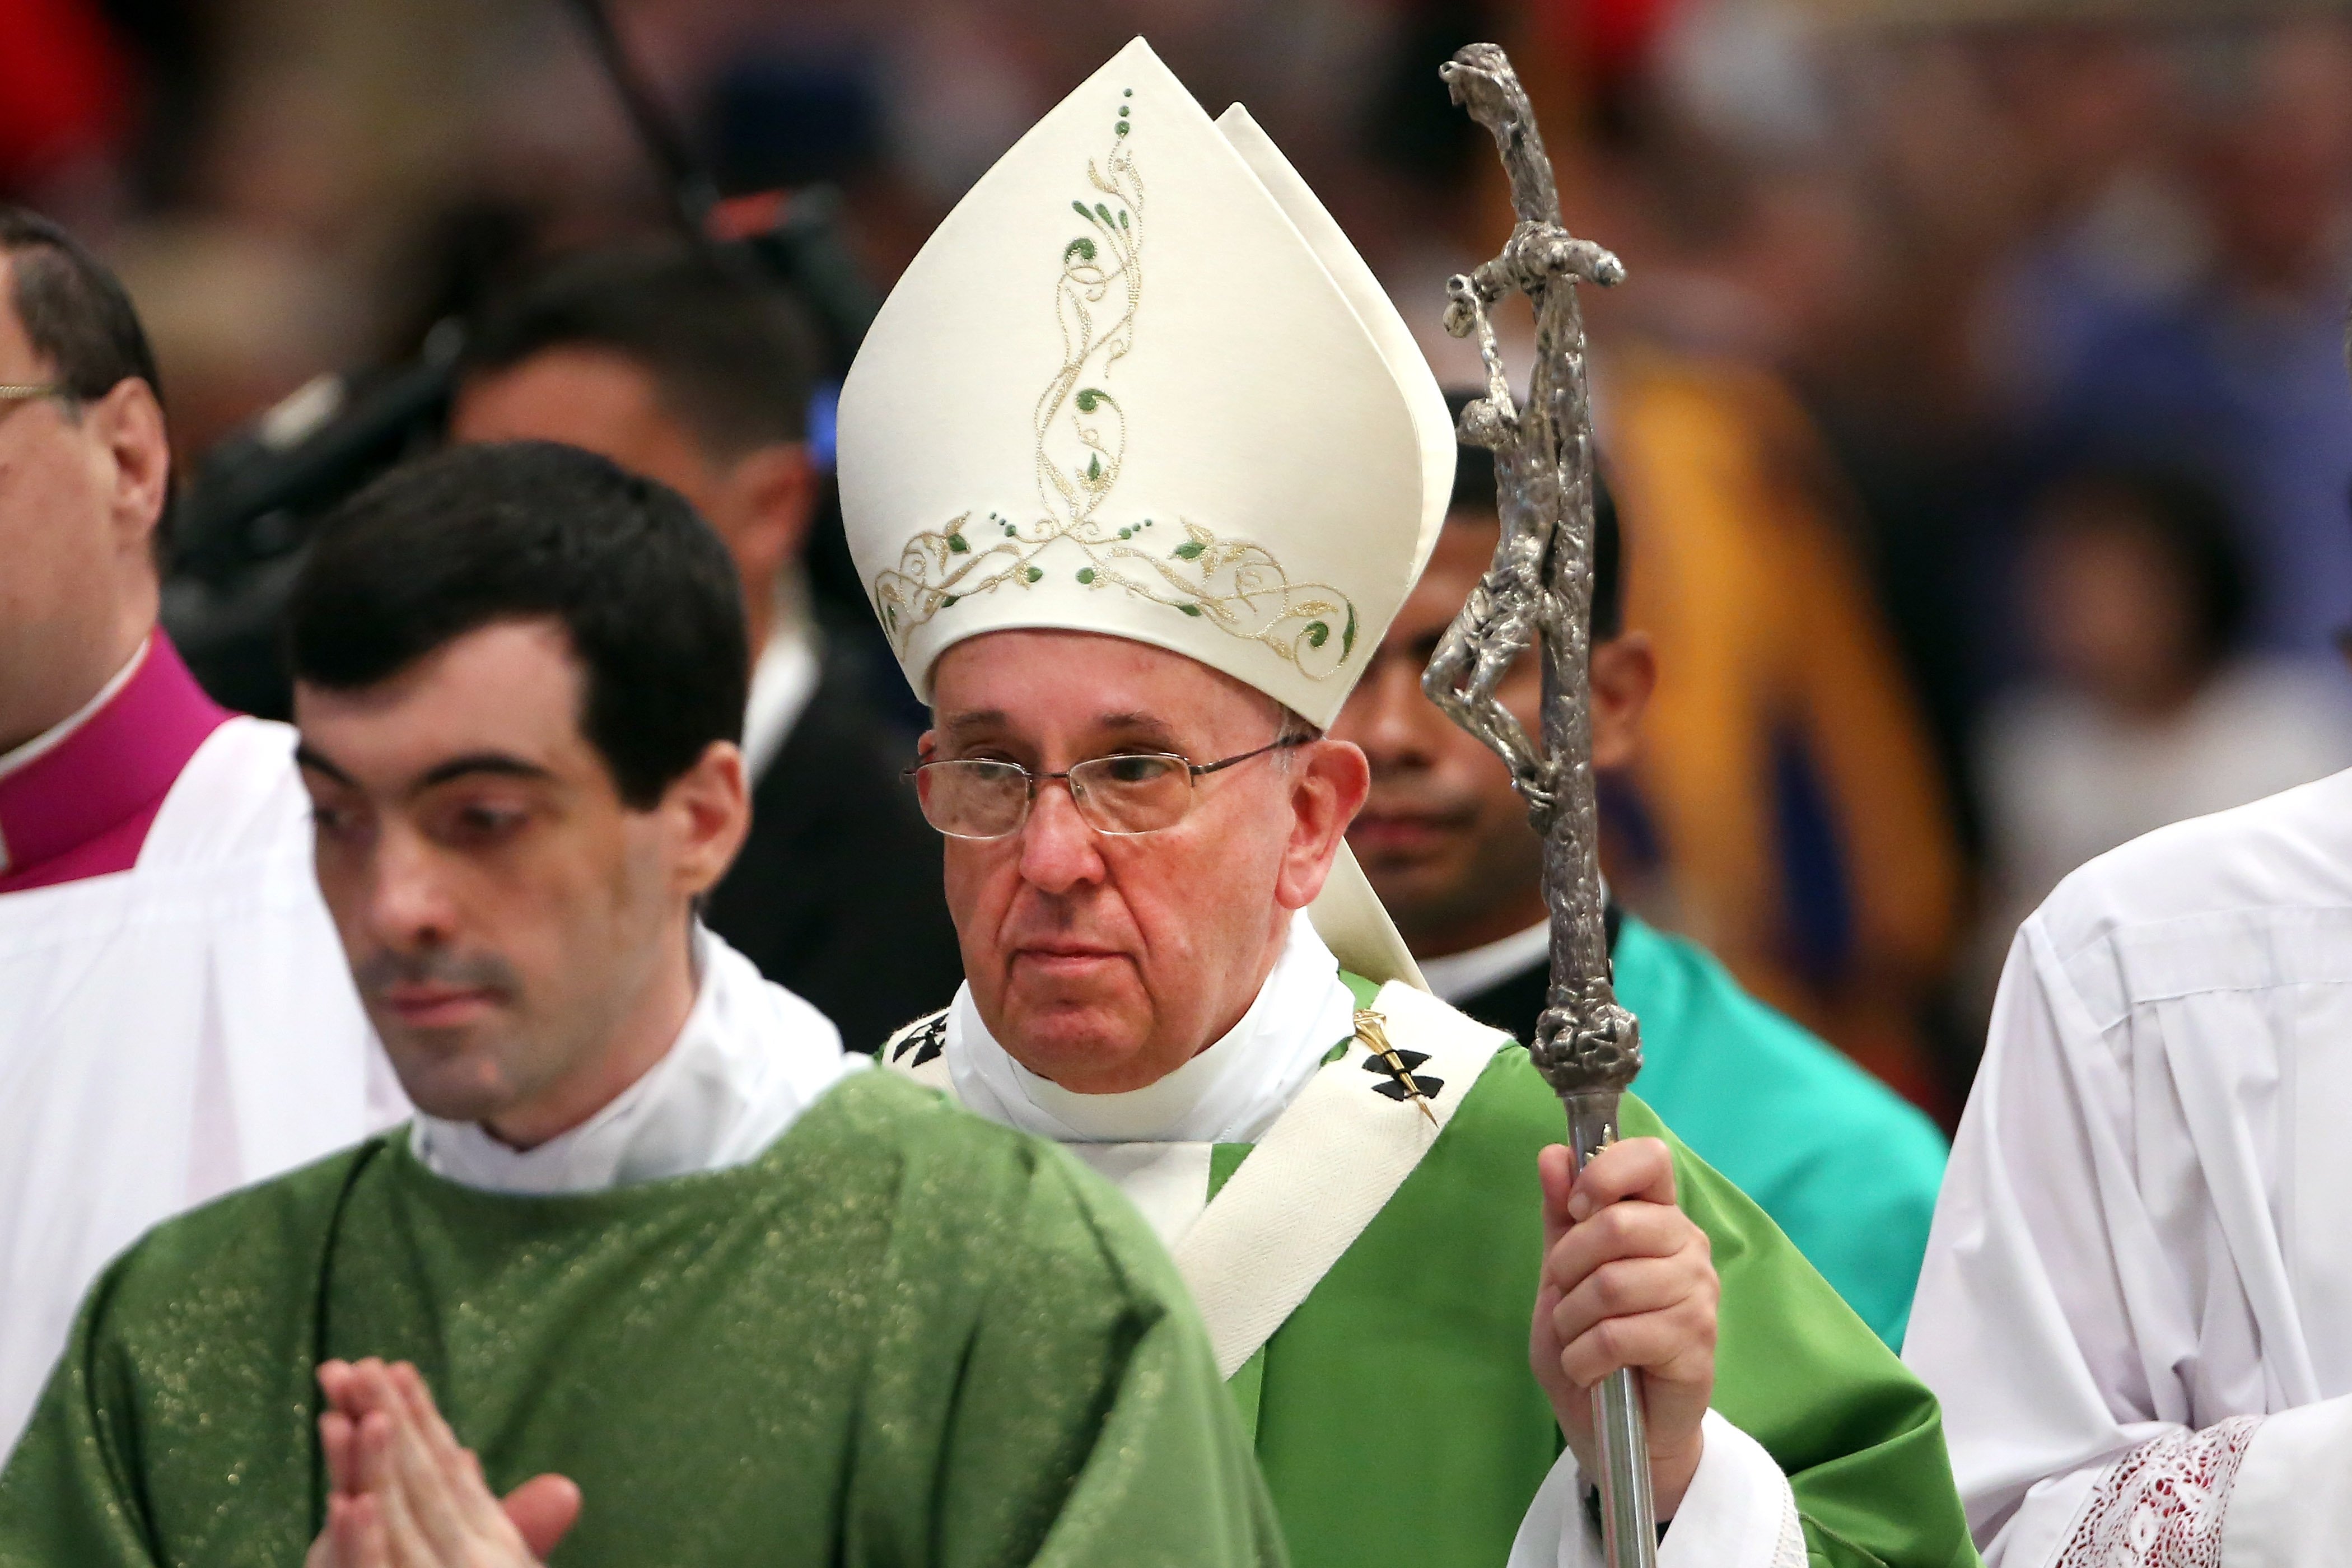 Pope Francis attends the Opening Mass of the Synod of Bishops in St. Peter's Basilica on Oct. 5, 2014 in Vatican City. (Franco Origlia—Getty Images)